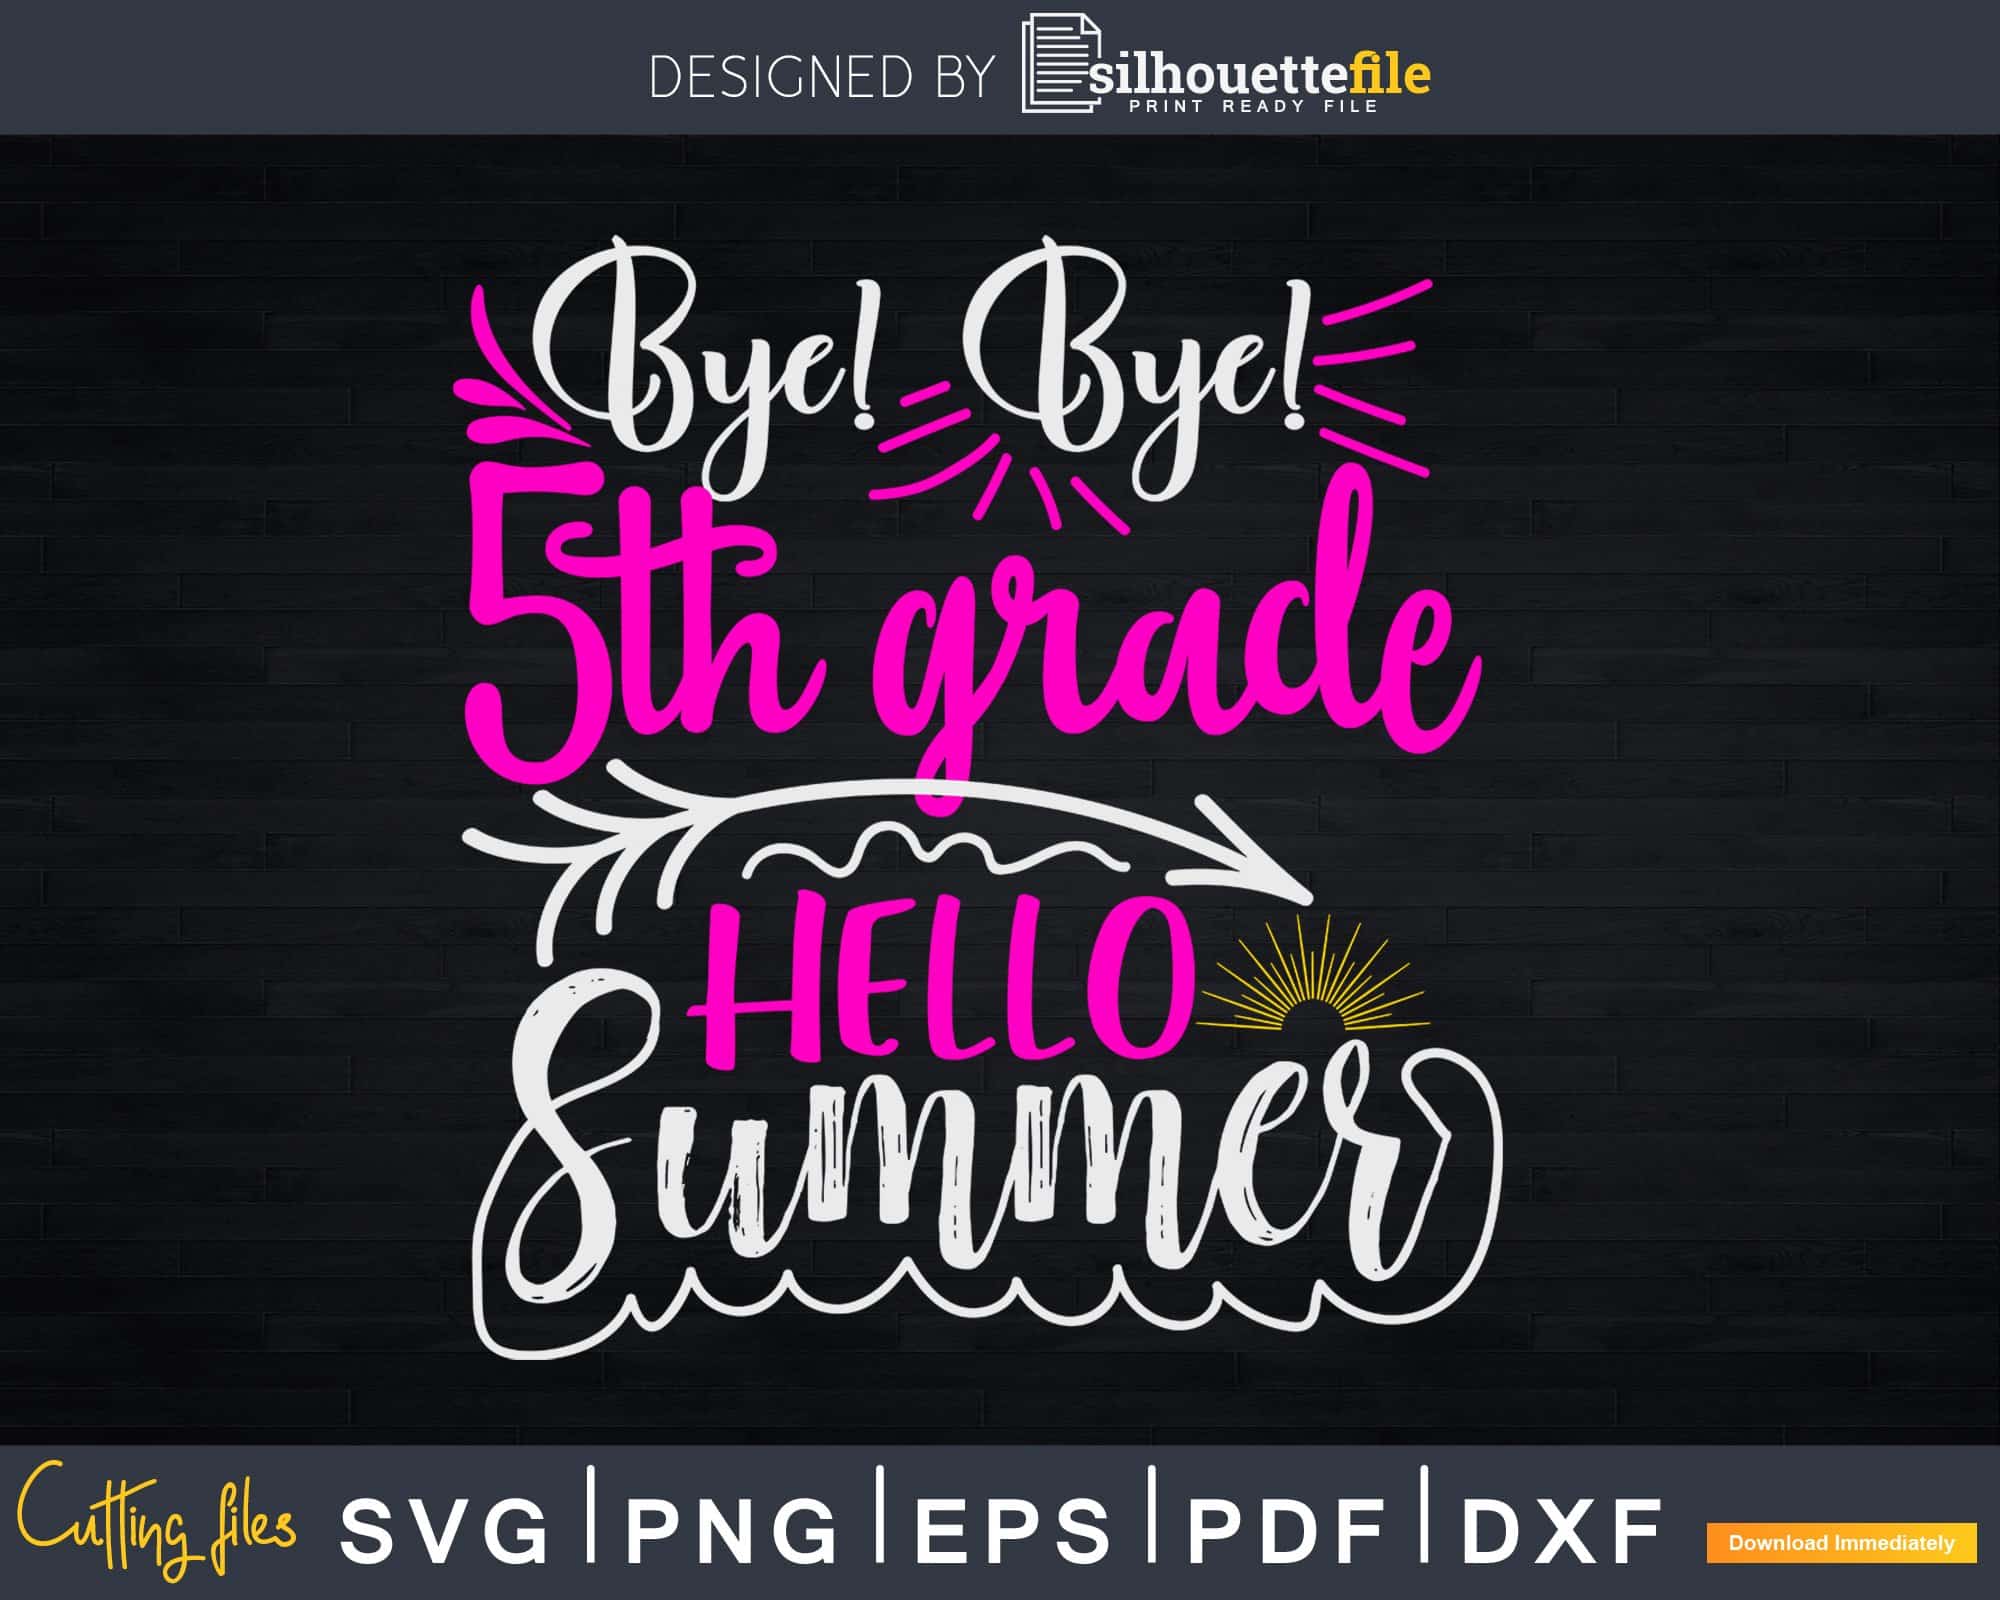 Download Bye Bye 5th Grade Hello Summer Svg Cricut Craft Cut Files Silhouettefile